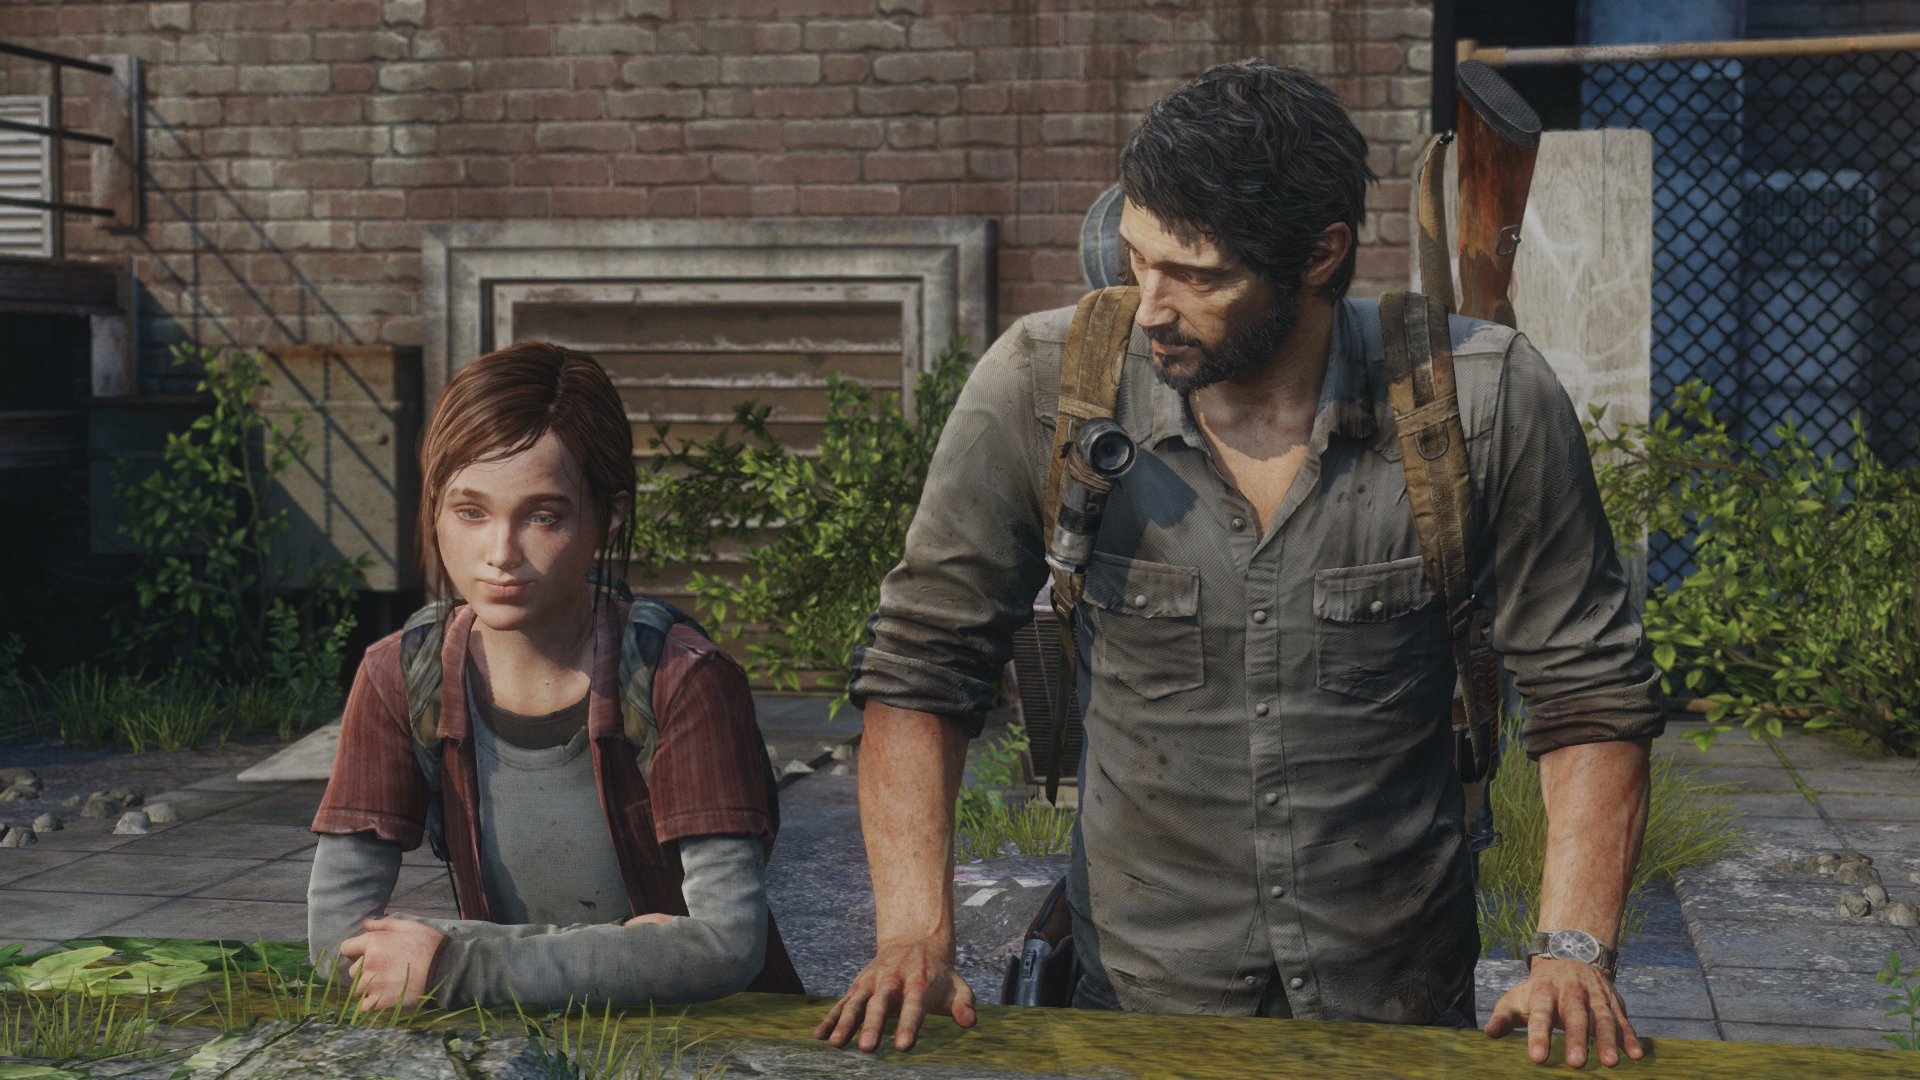 The Last Of Us Ellie And Joel Wallpaper,HD Tv Shows Wallpapers,4k Wallpapers,Images,Backgrounds,Photos  and Pictures